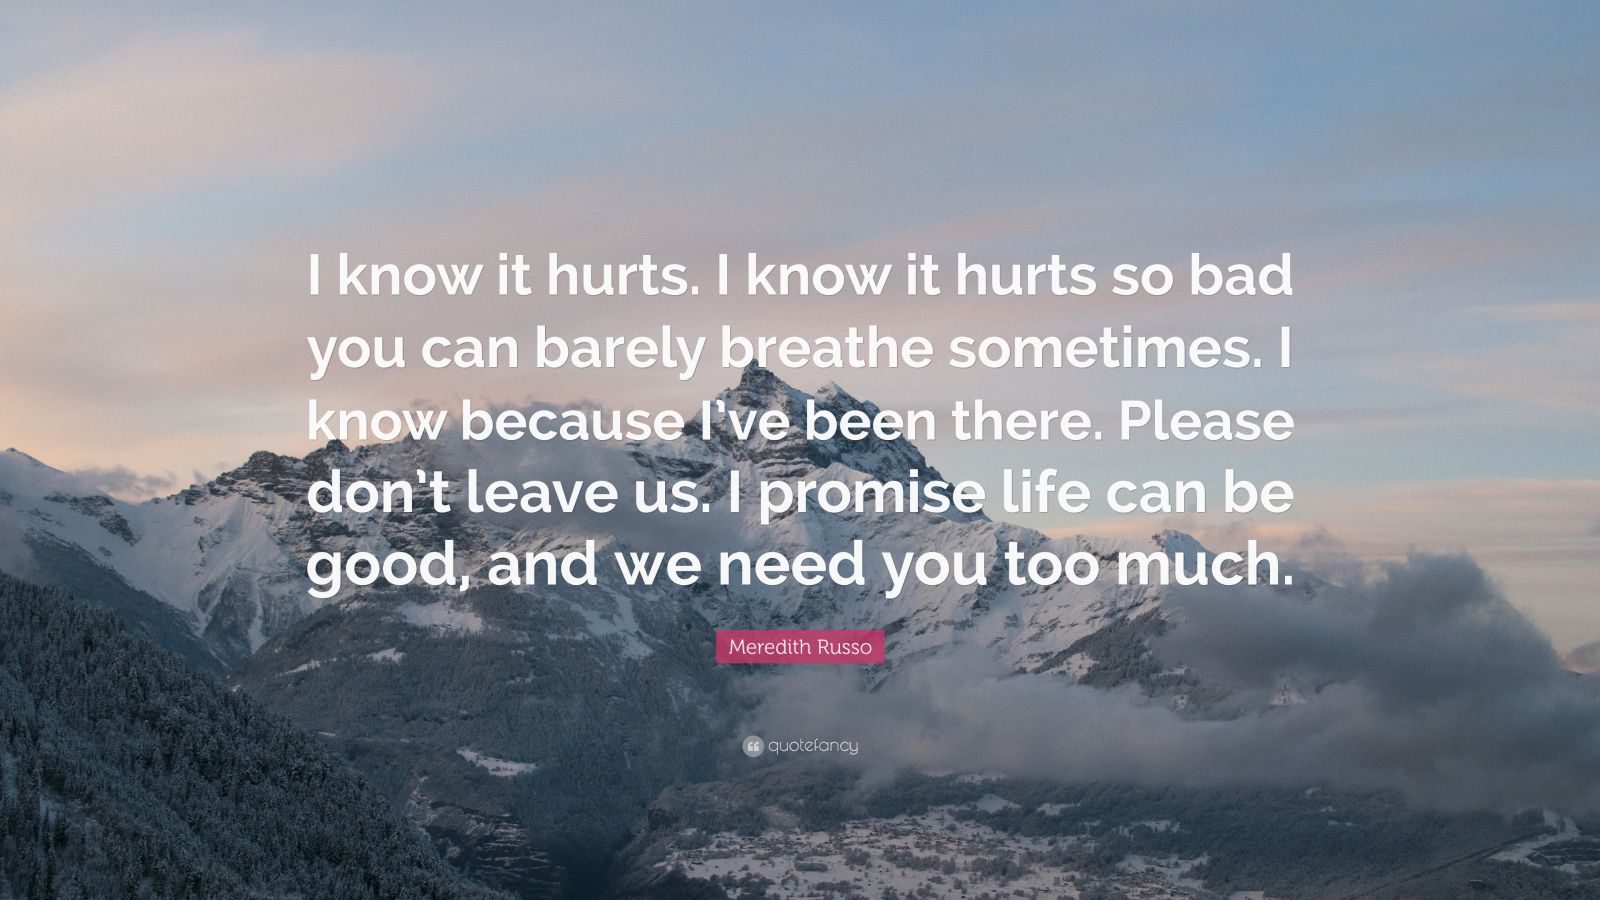 Meredith Russo Quote: “I know it hurts. I know it hurts so bad you can